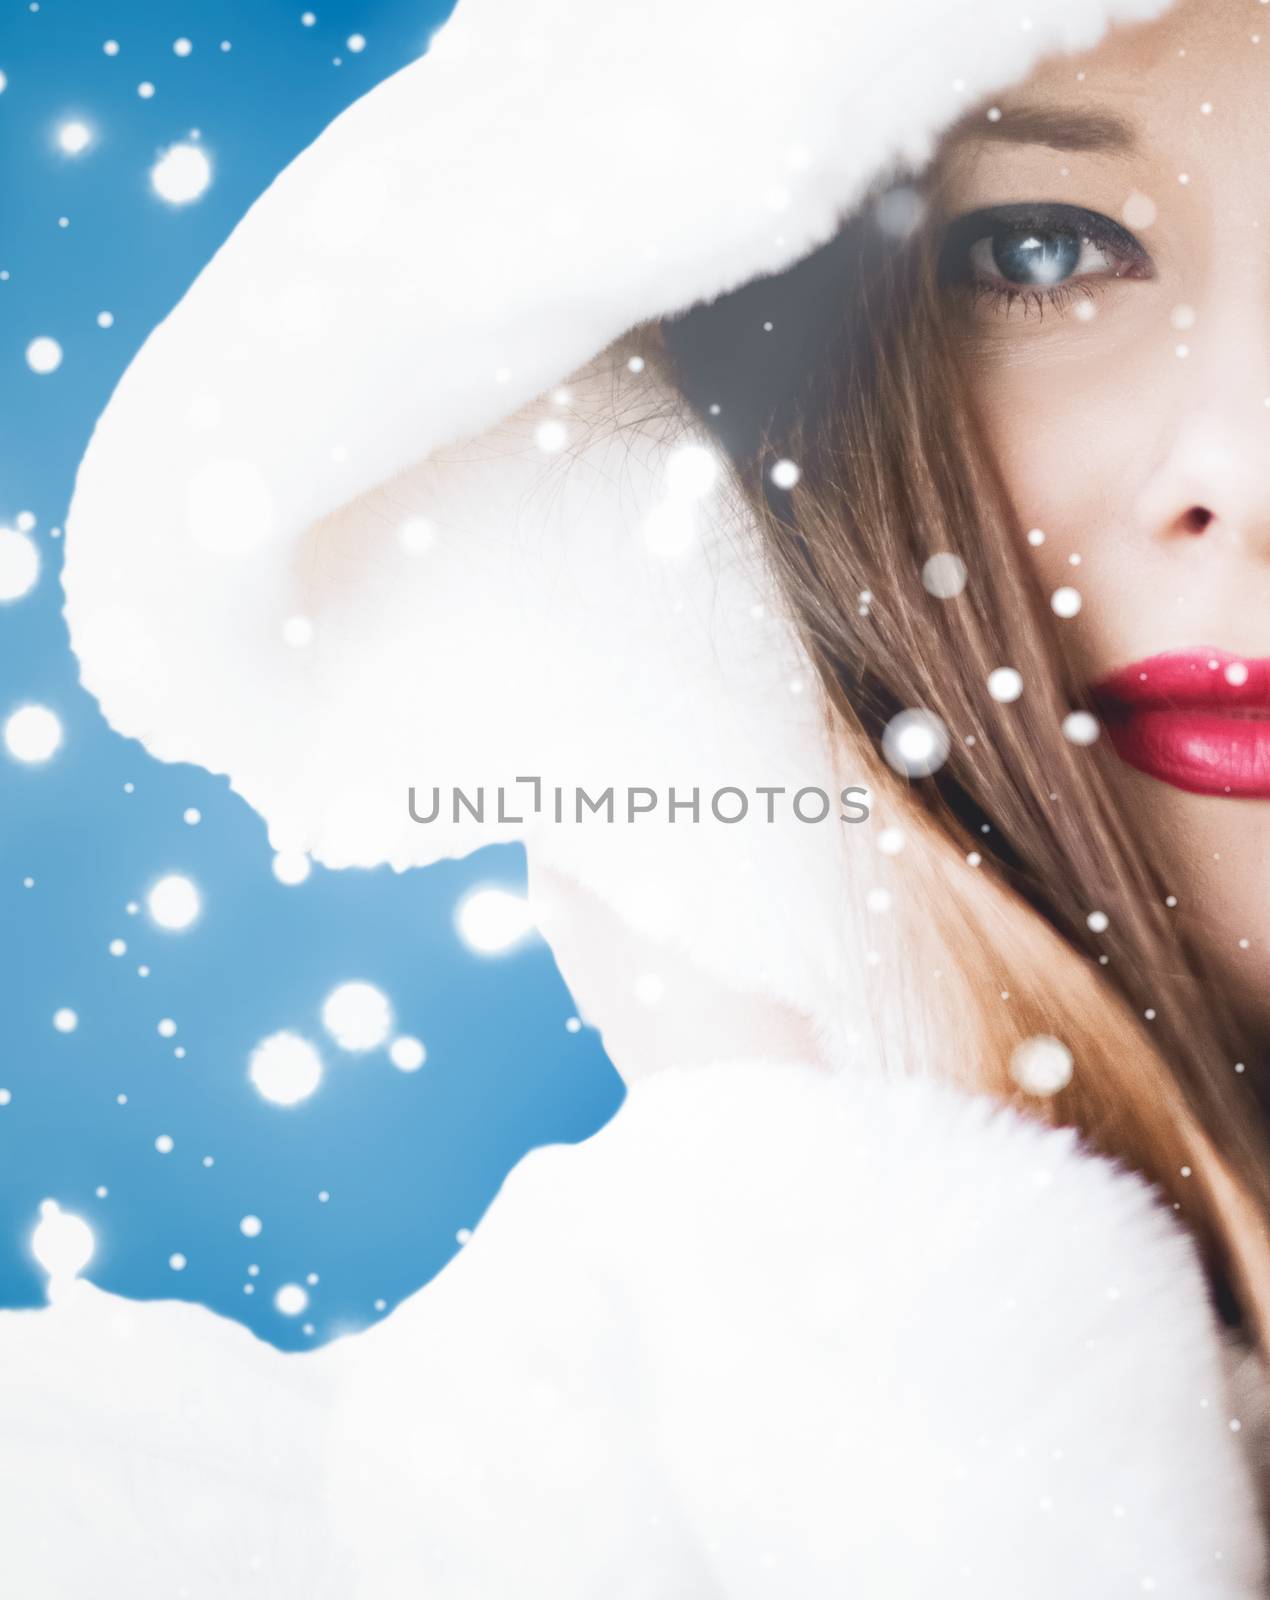 Happy Christmas and winter holiday portrait of young woman in white hooded fur coat, snow on blue background, fashion and lifestyle campaign